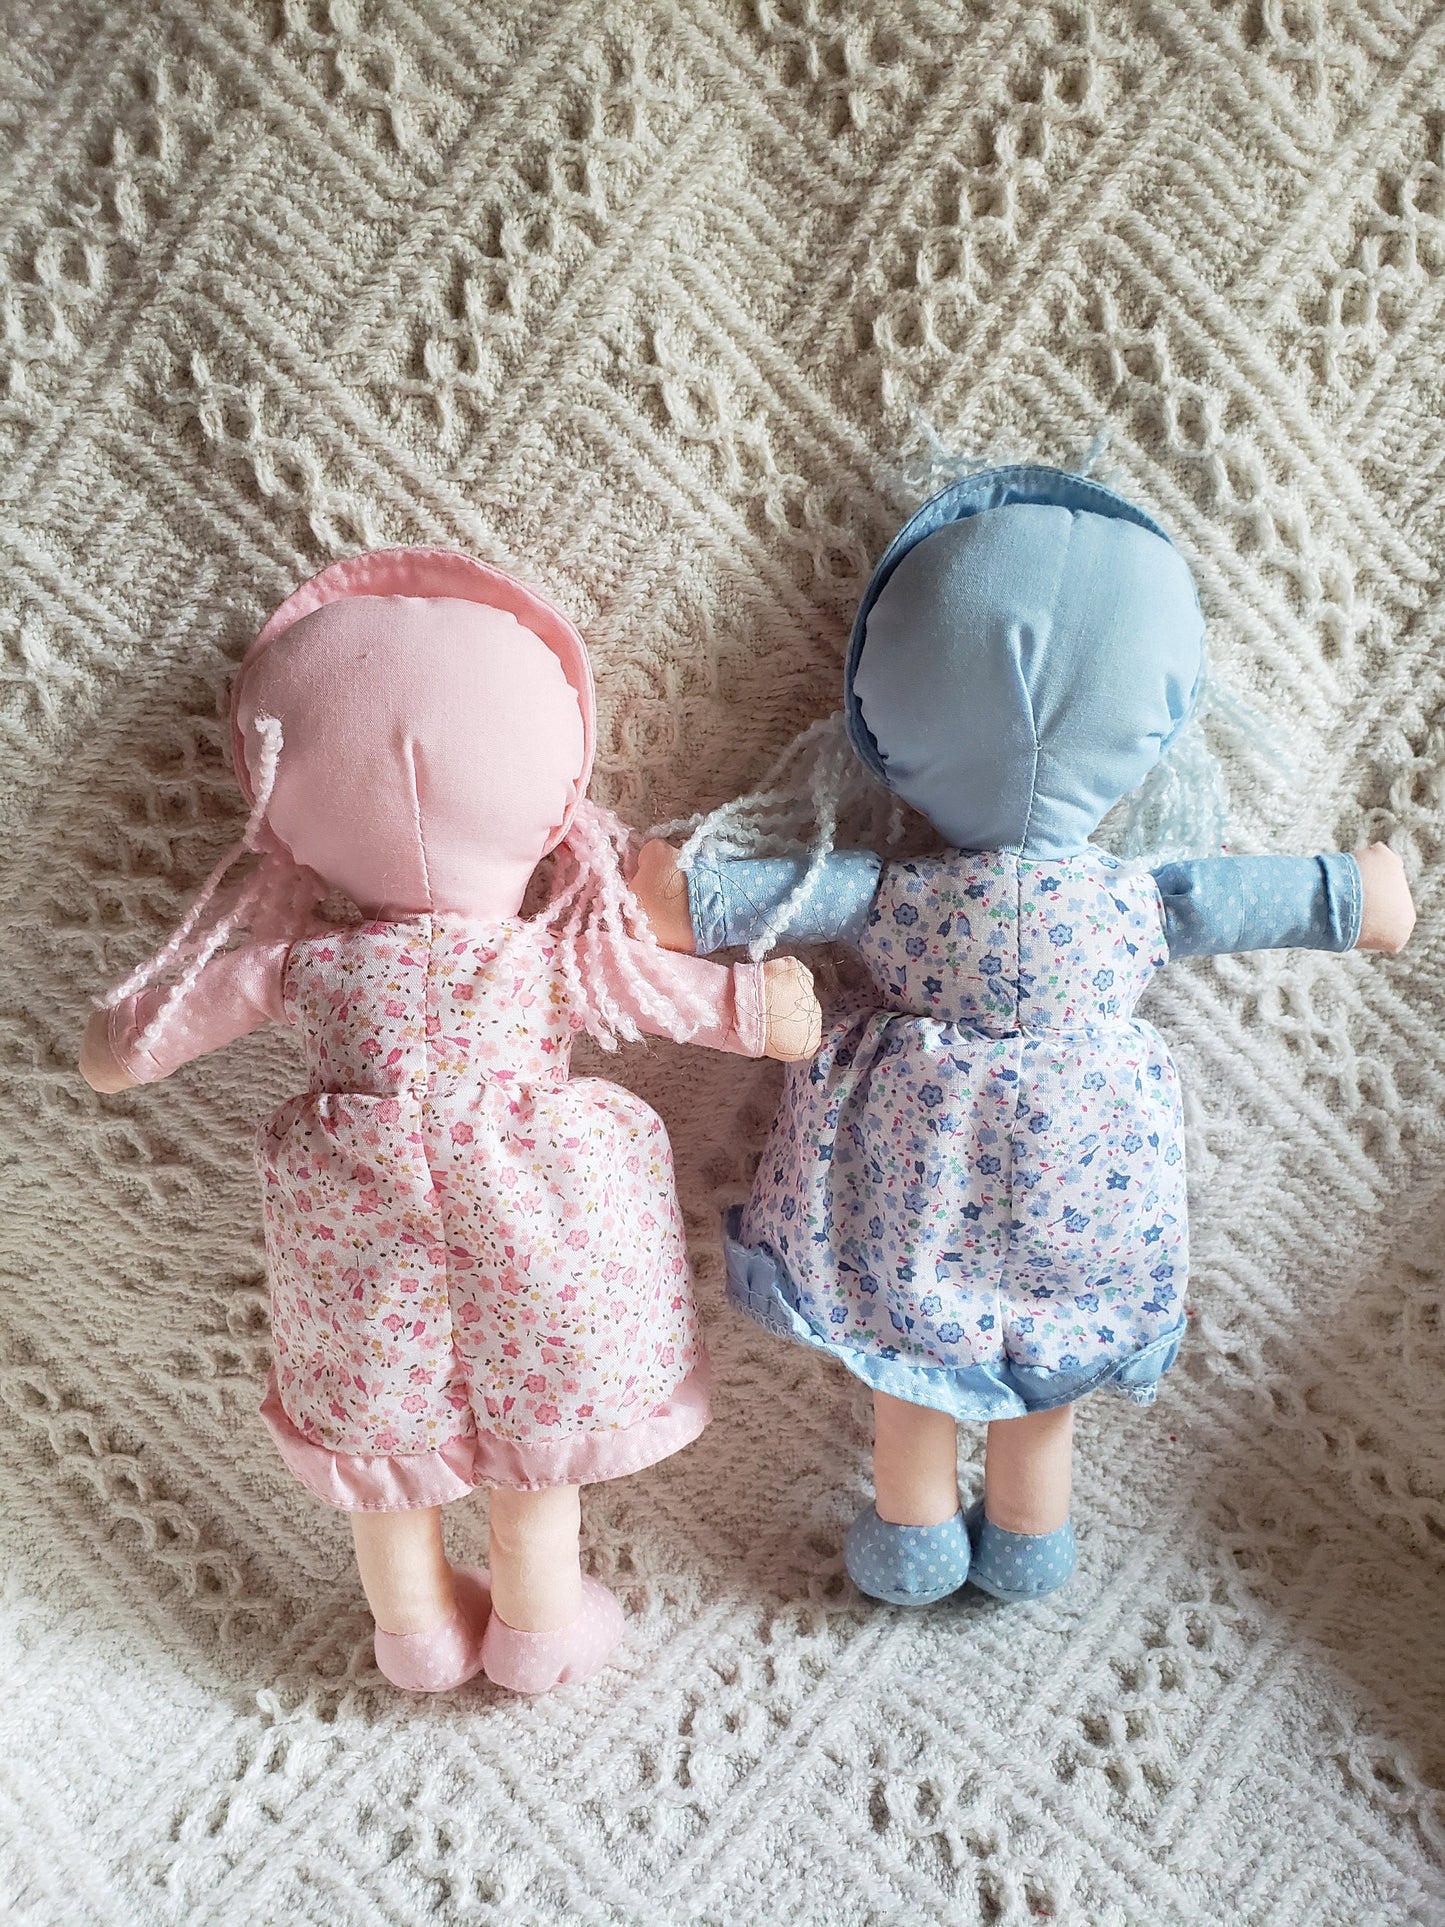 2 Kammie Dolls from the Jackie and Kammie Dolls Collection